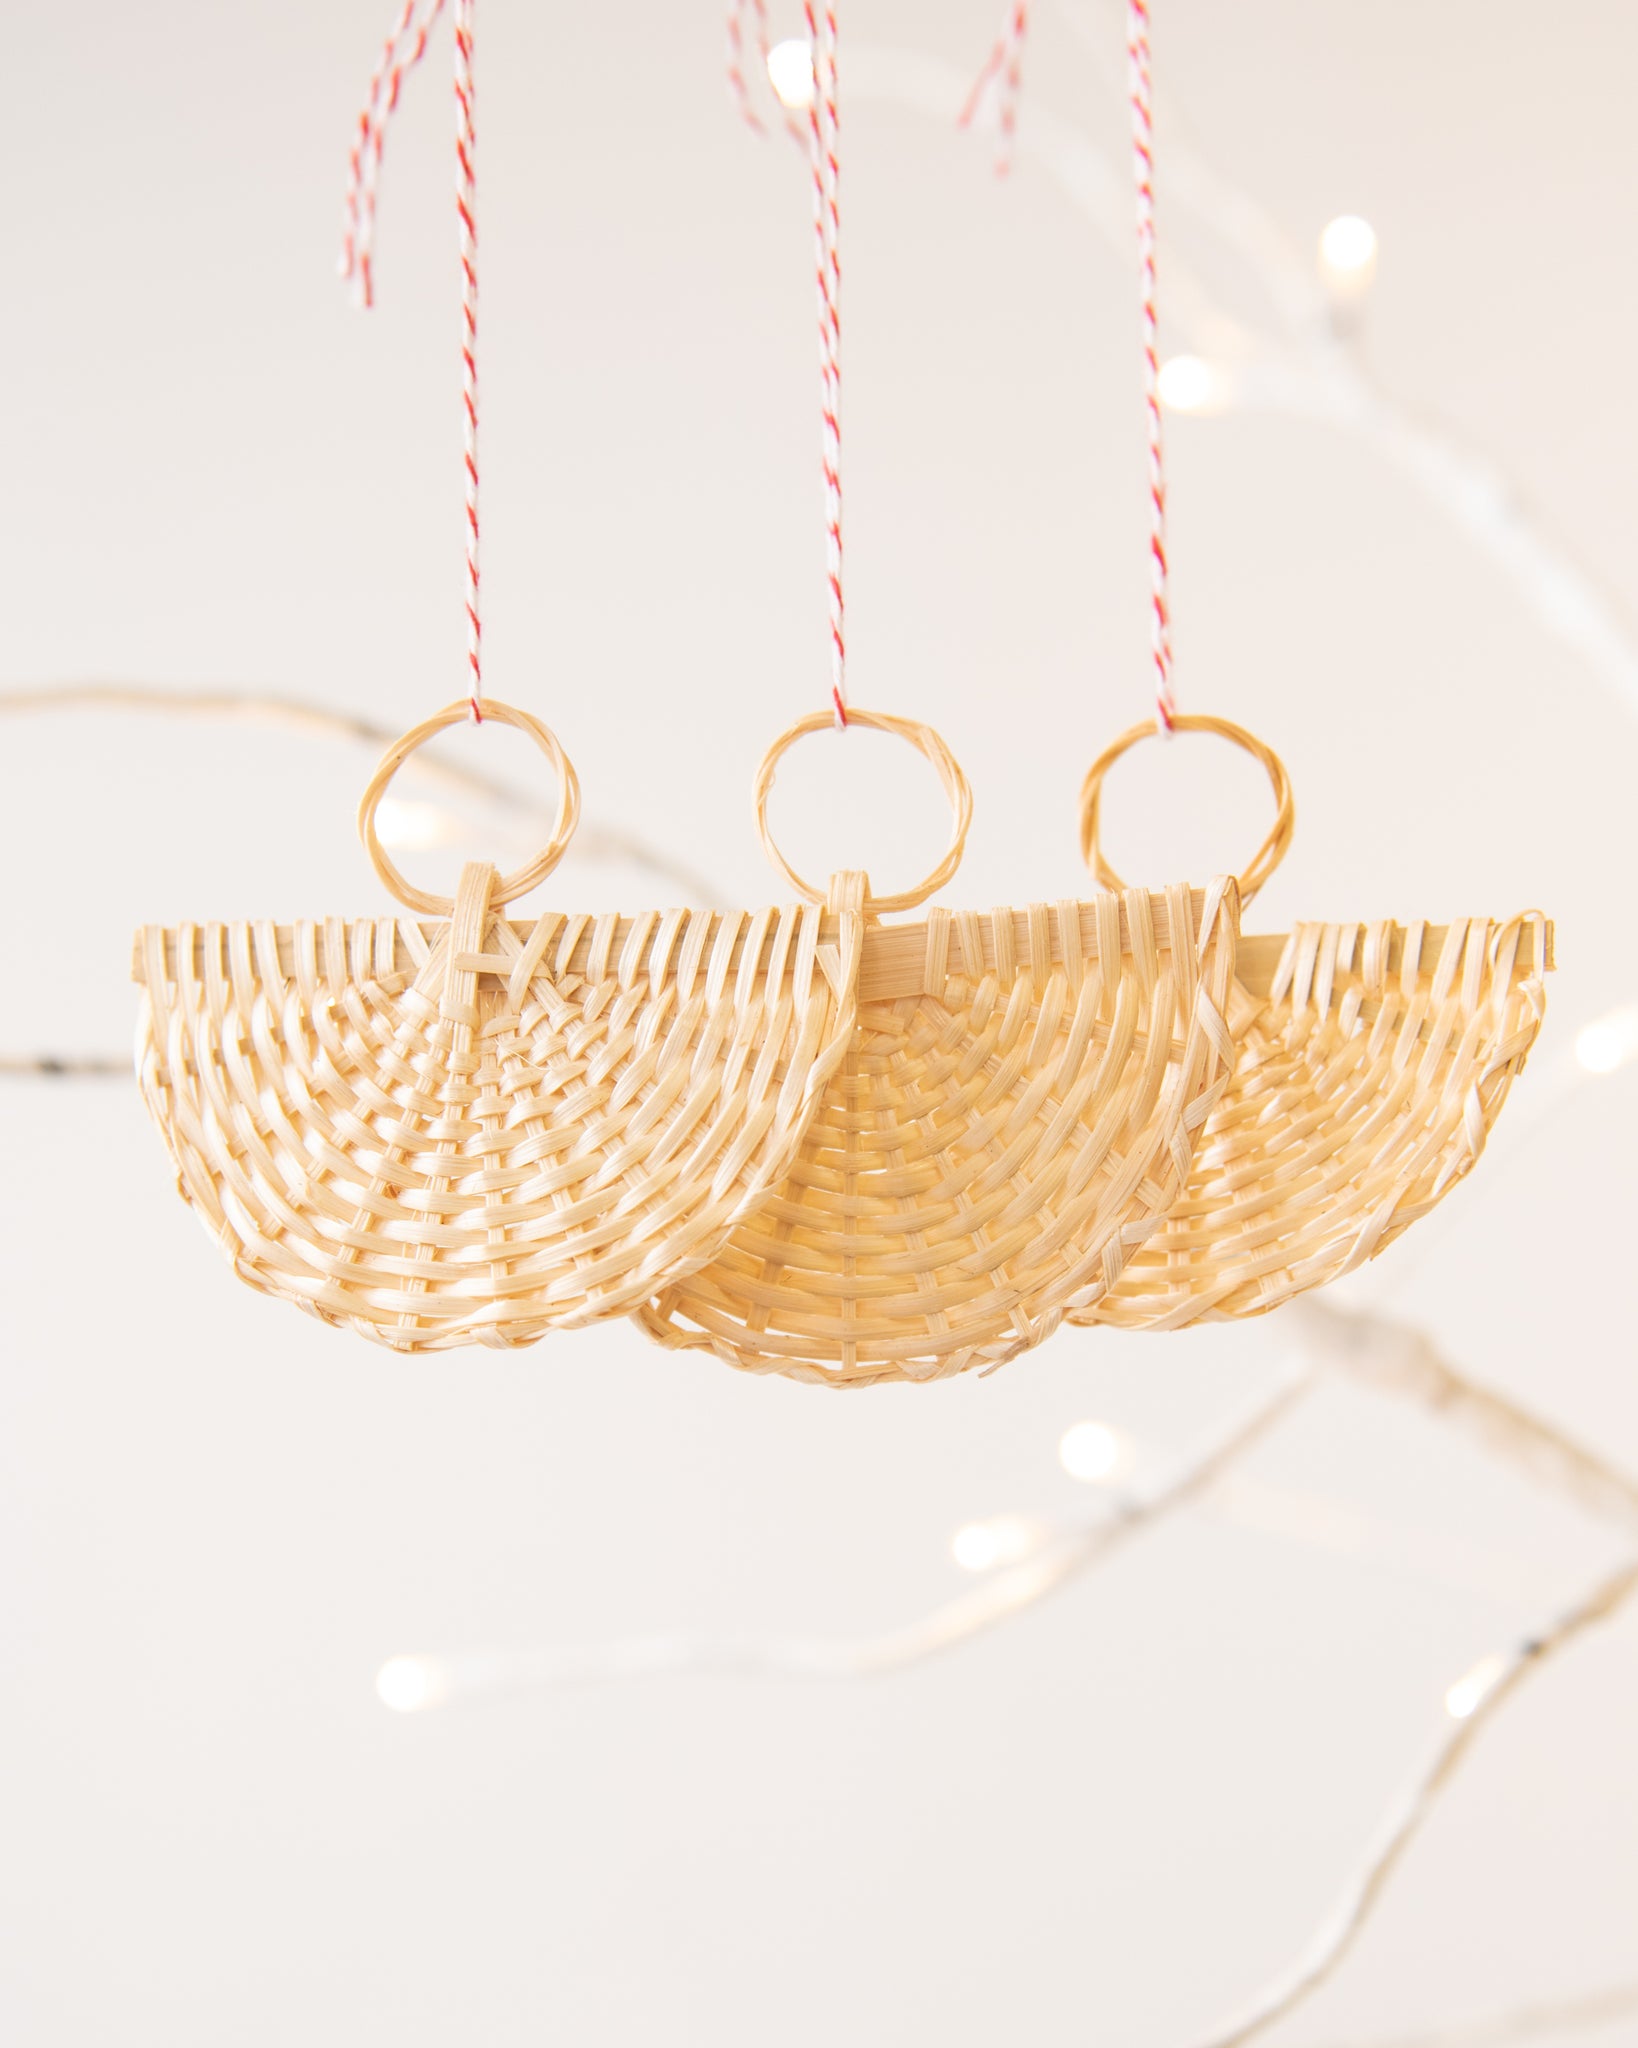 rattan angel ornaments with red and white striped string on a birch tree with tree lights, white background